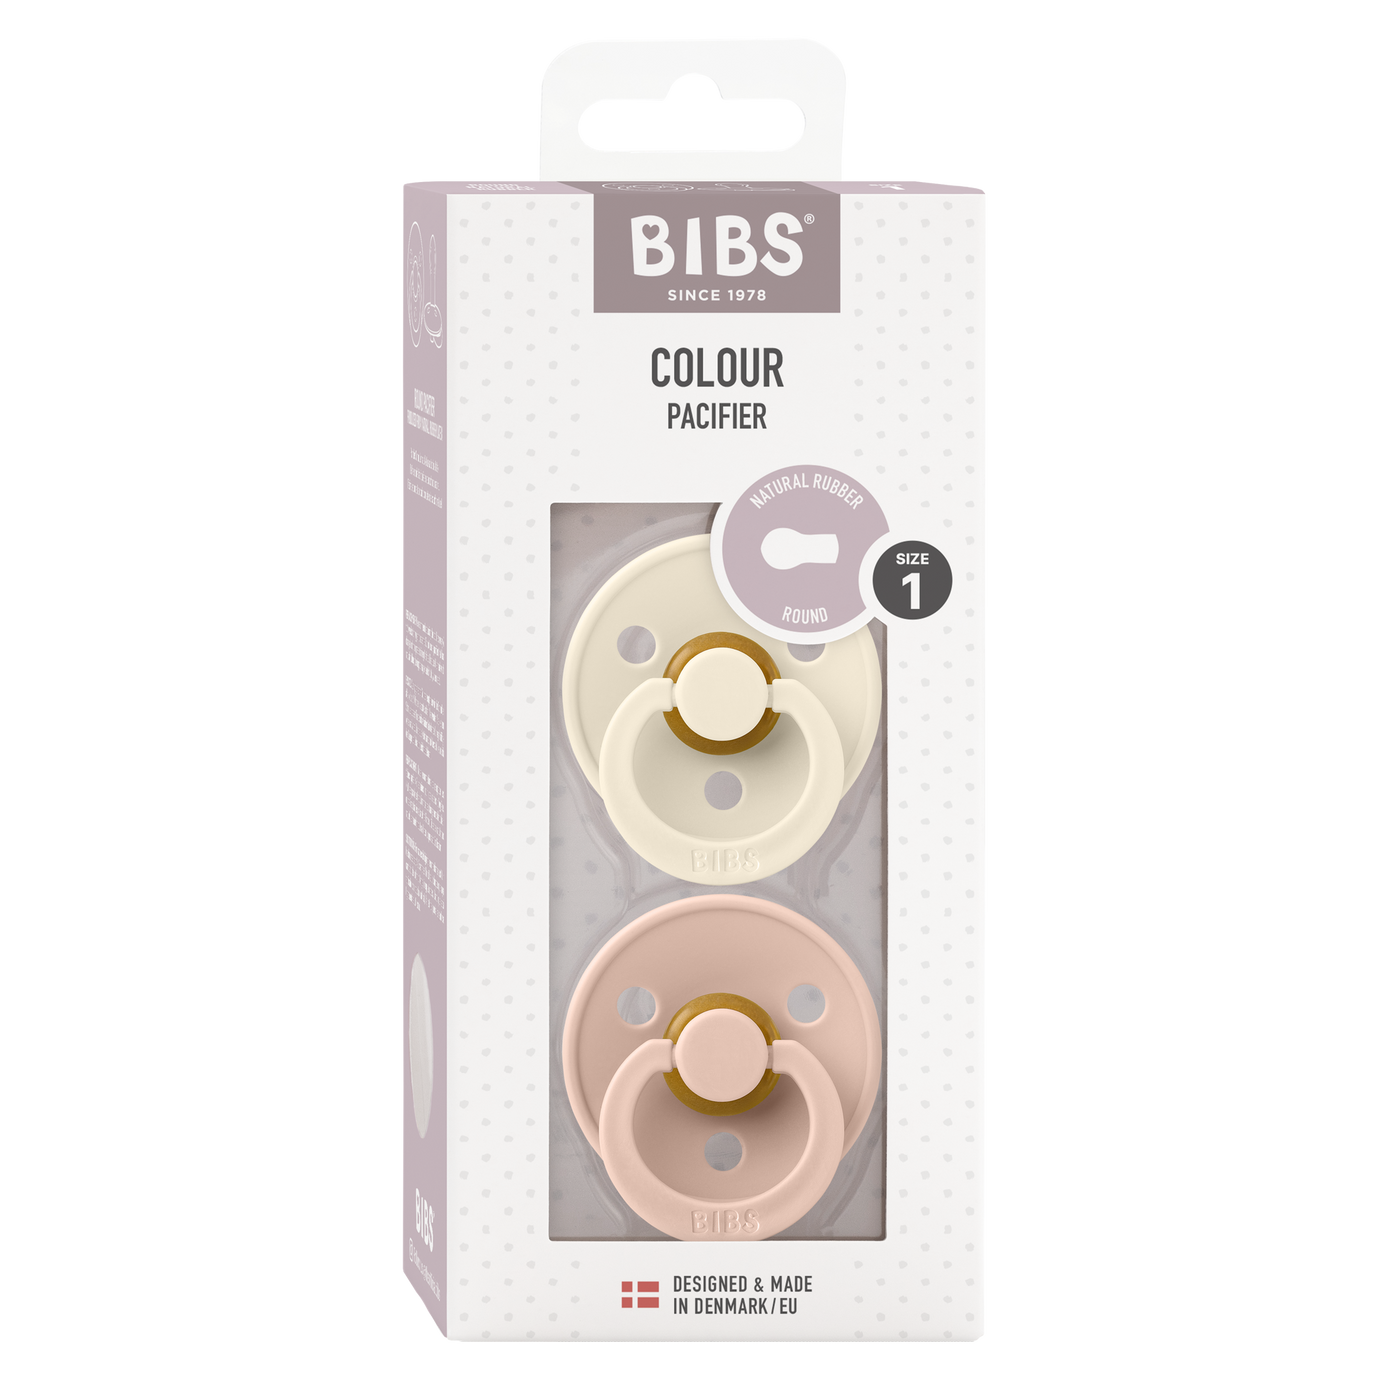 BIBS Colour Latex Pacifiers - Ivory/Blush - 2 Pack